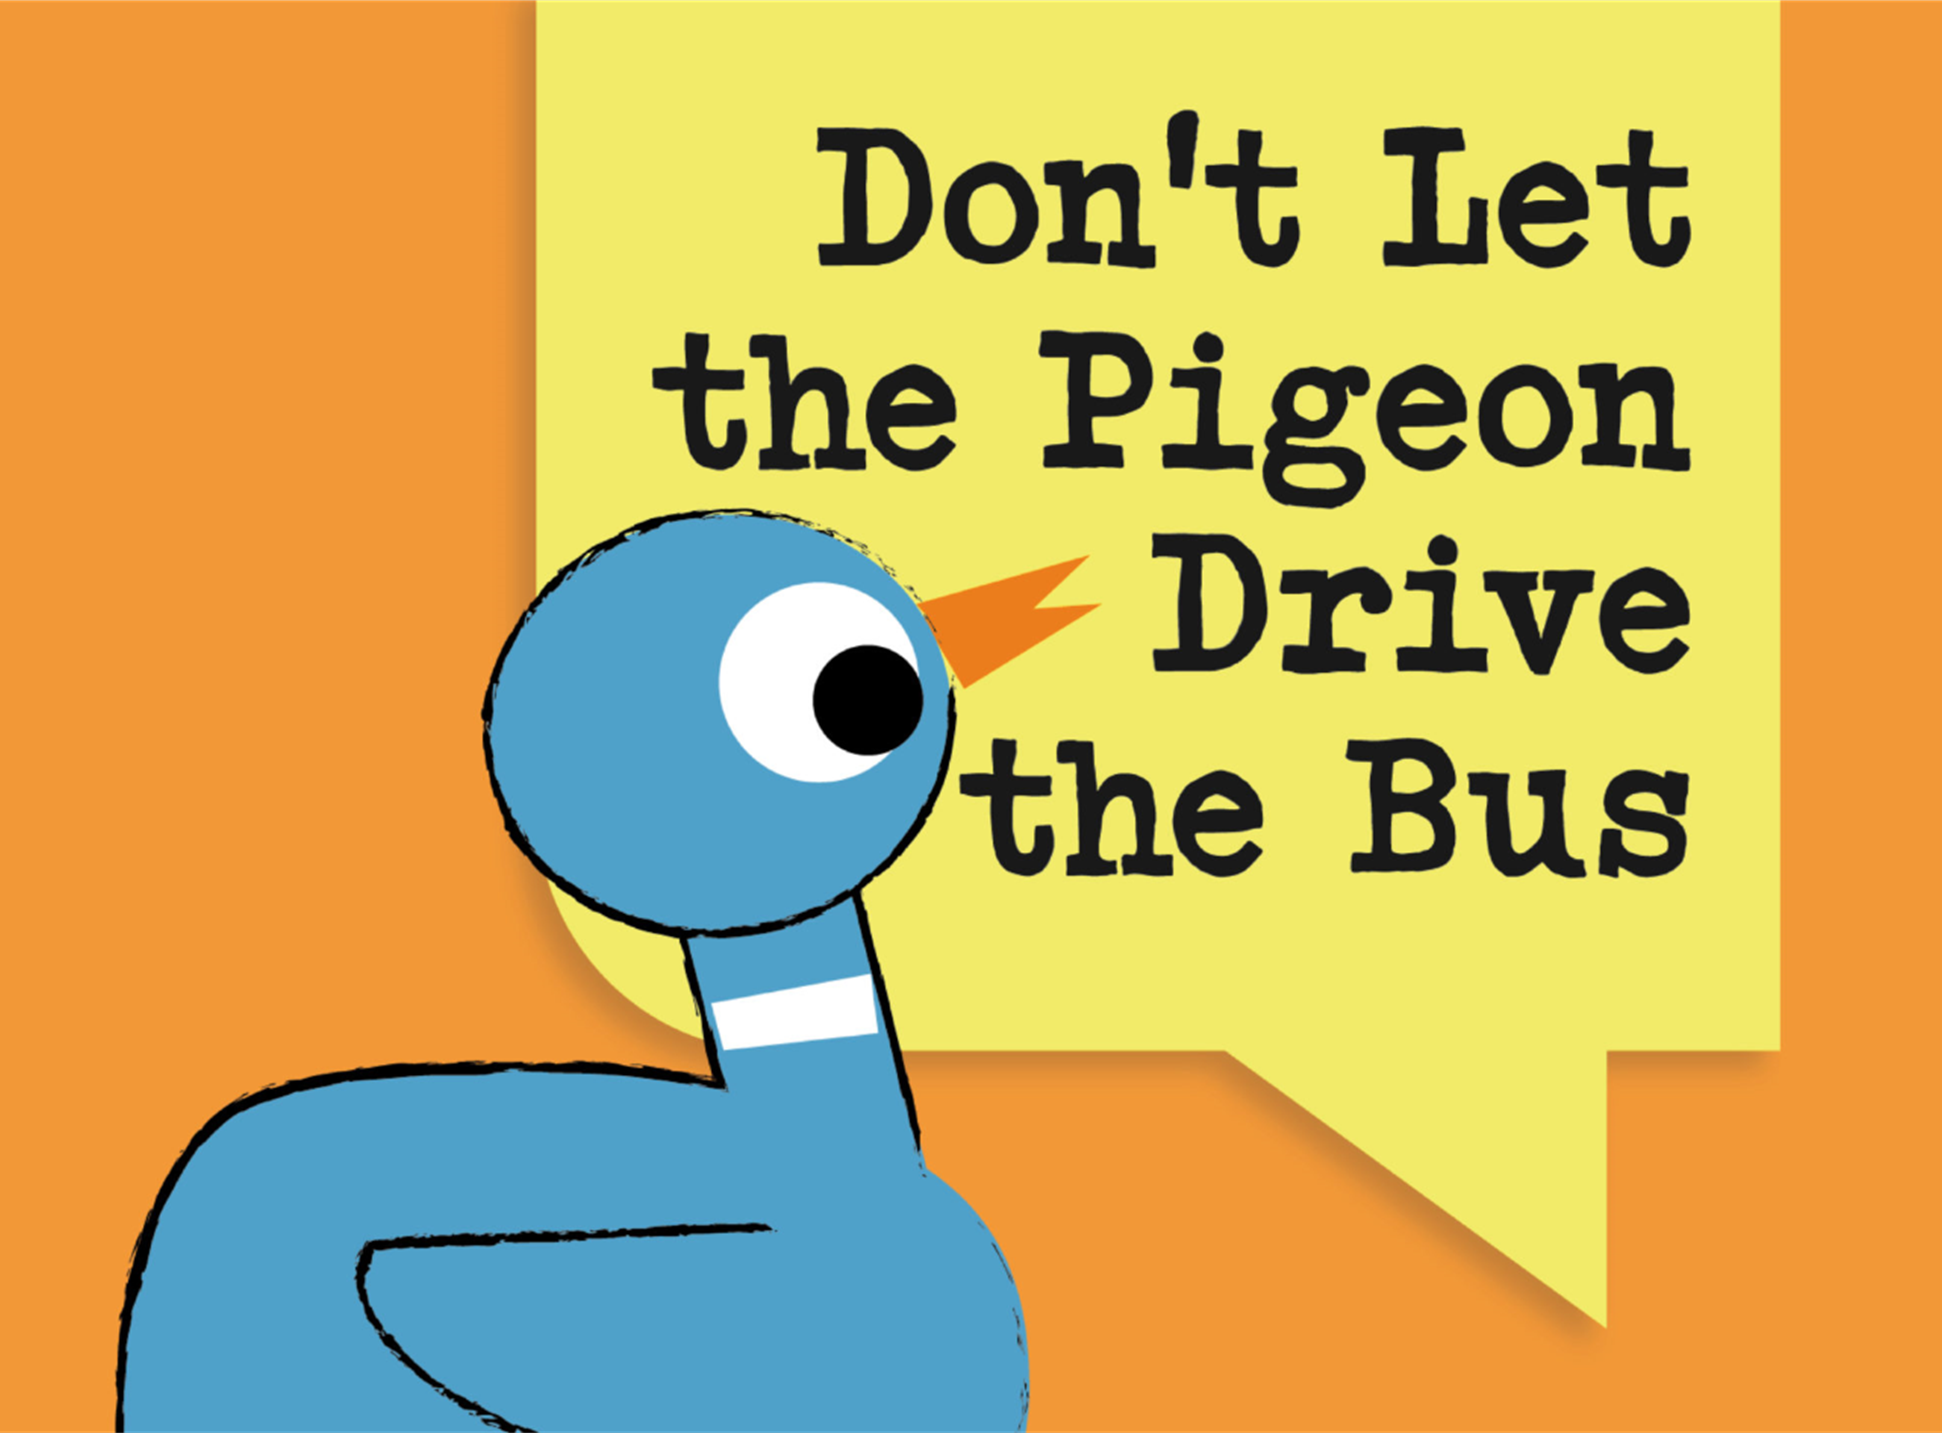 Orange background with black text that says "Don't let the pigeon drive the bus" next to a blue pigeon